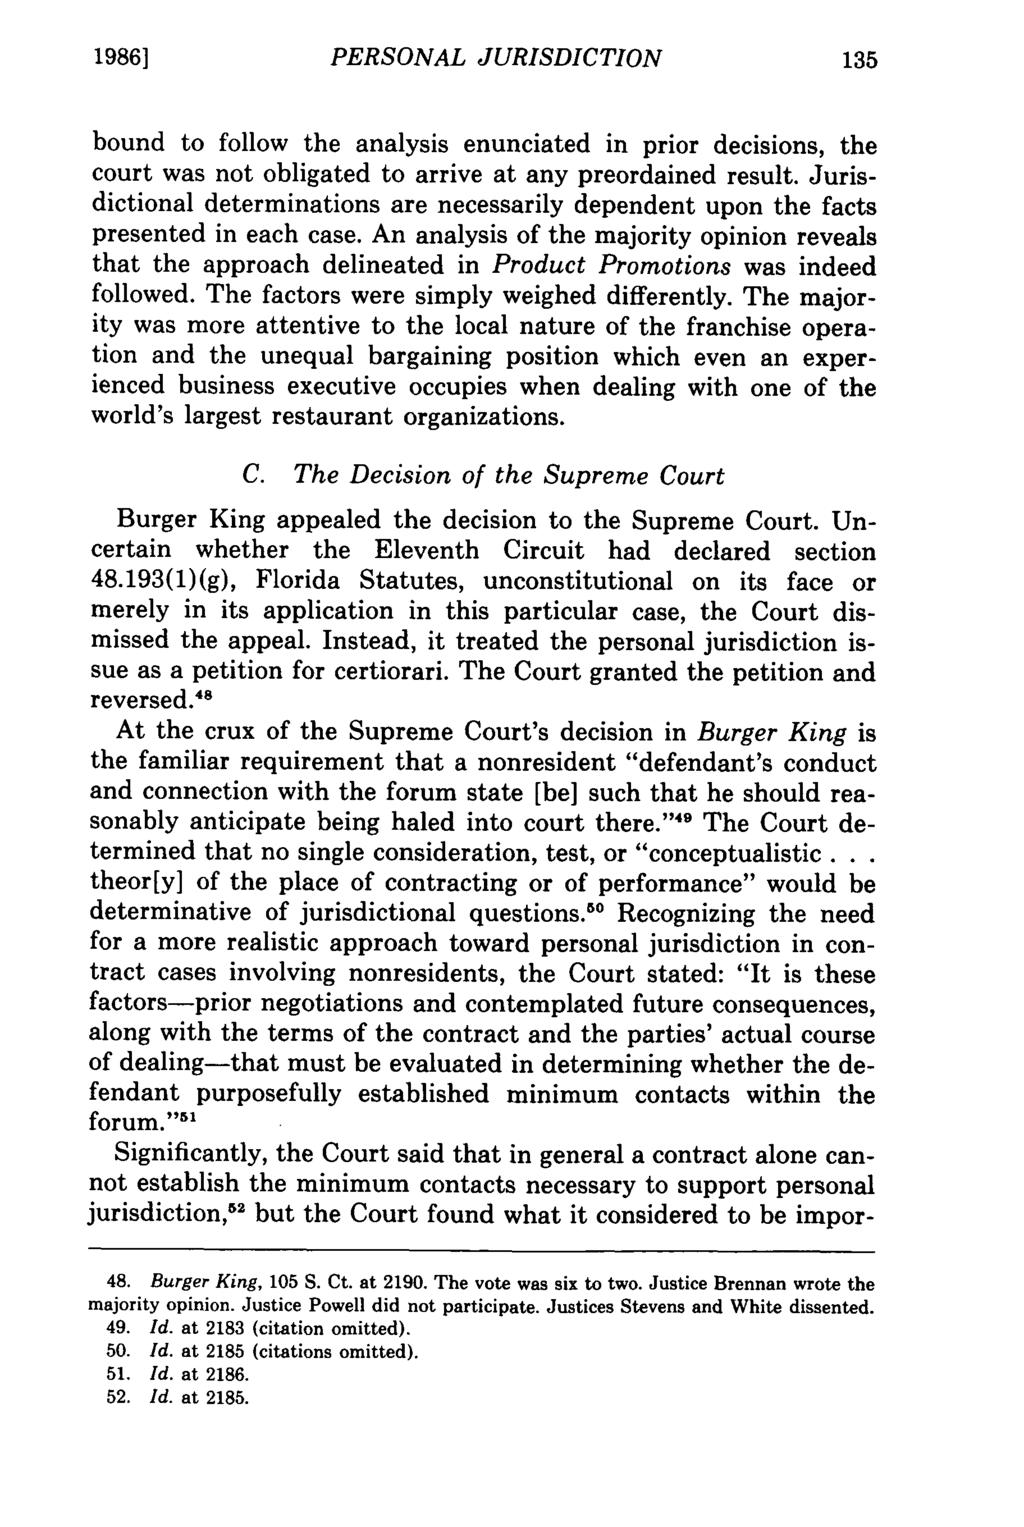 1986] PERSONAL JURISDICTION bound to follow the analysis enunciated in prior decisions, the court was not obligated to arrive at any preordained result.